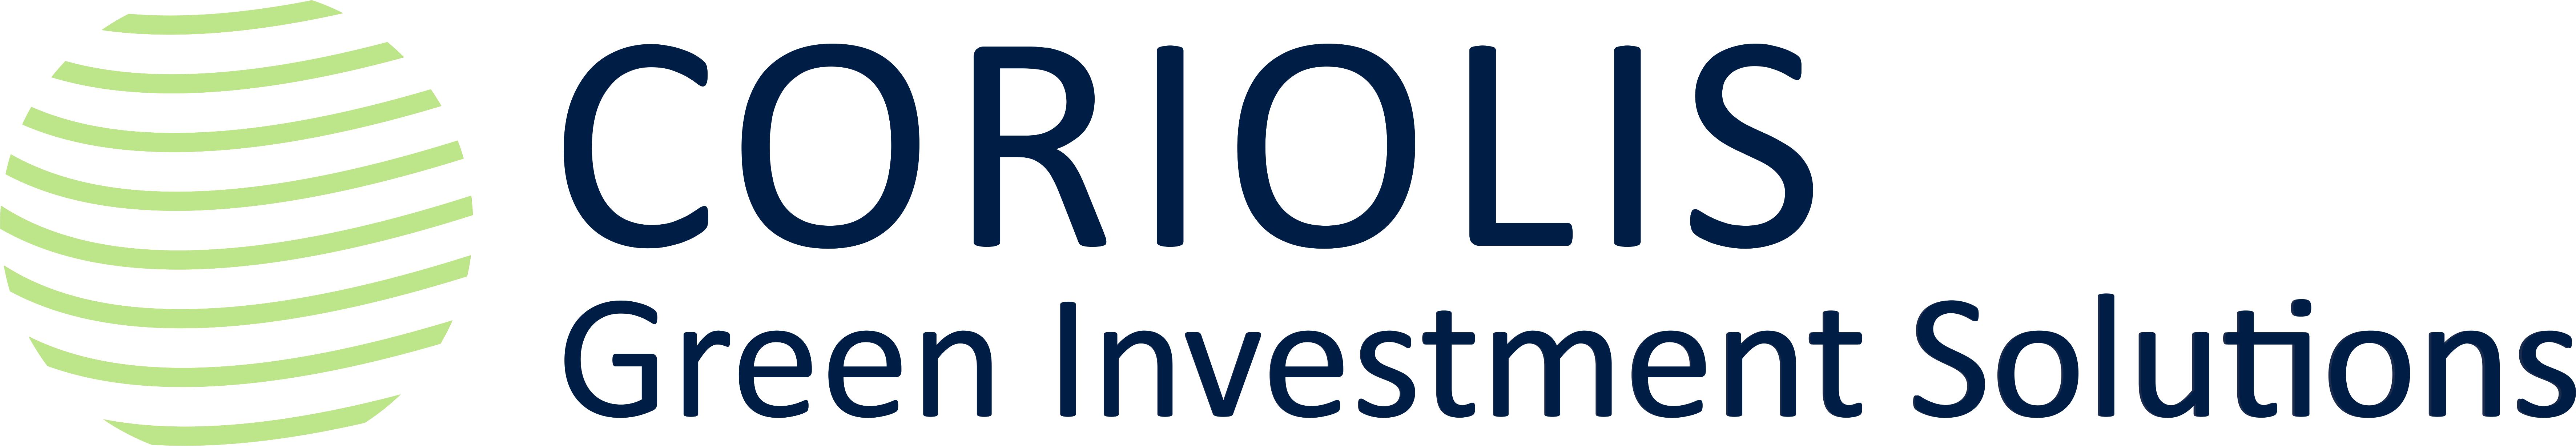 CORIOLIS Green Investment Solutions